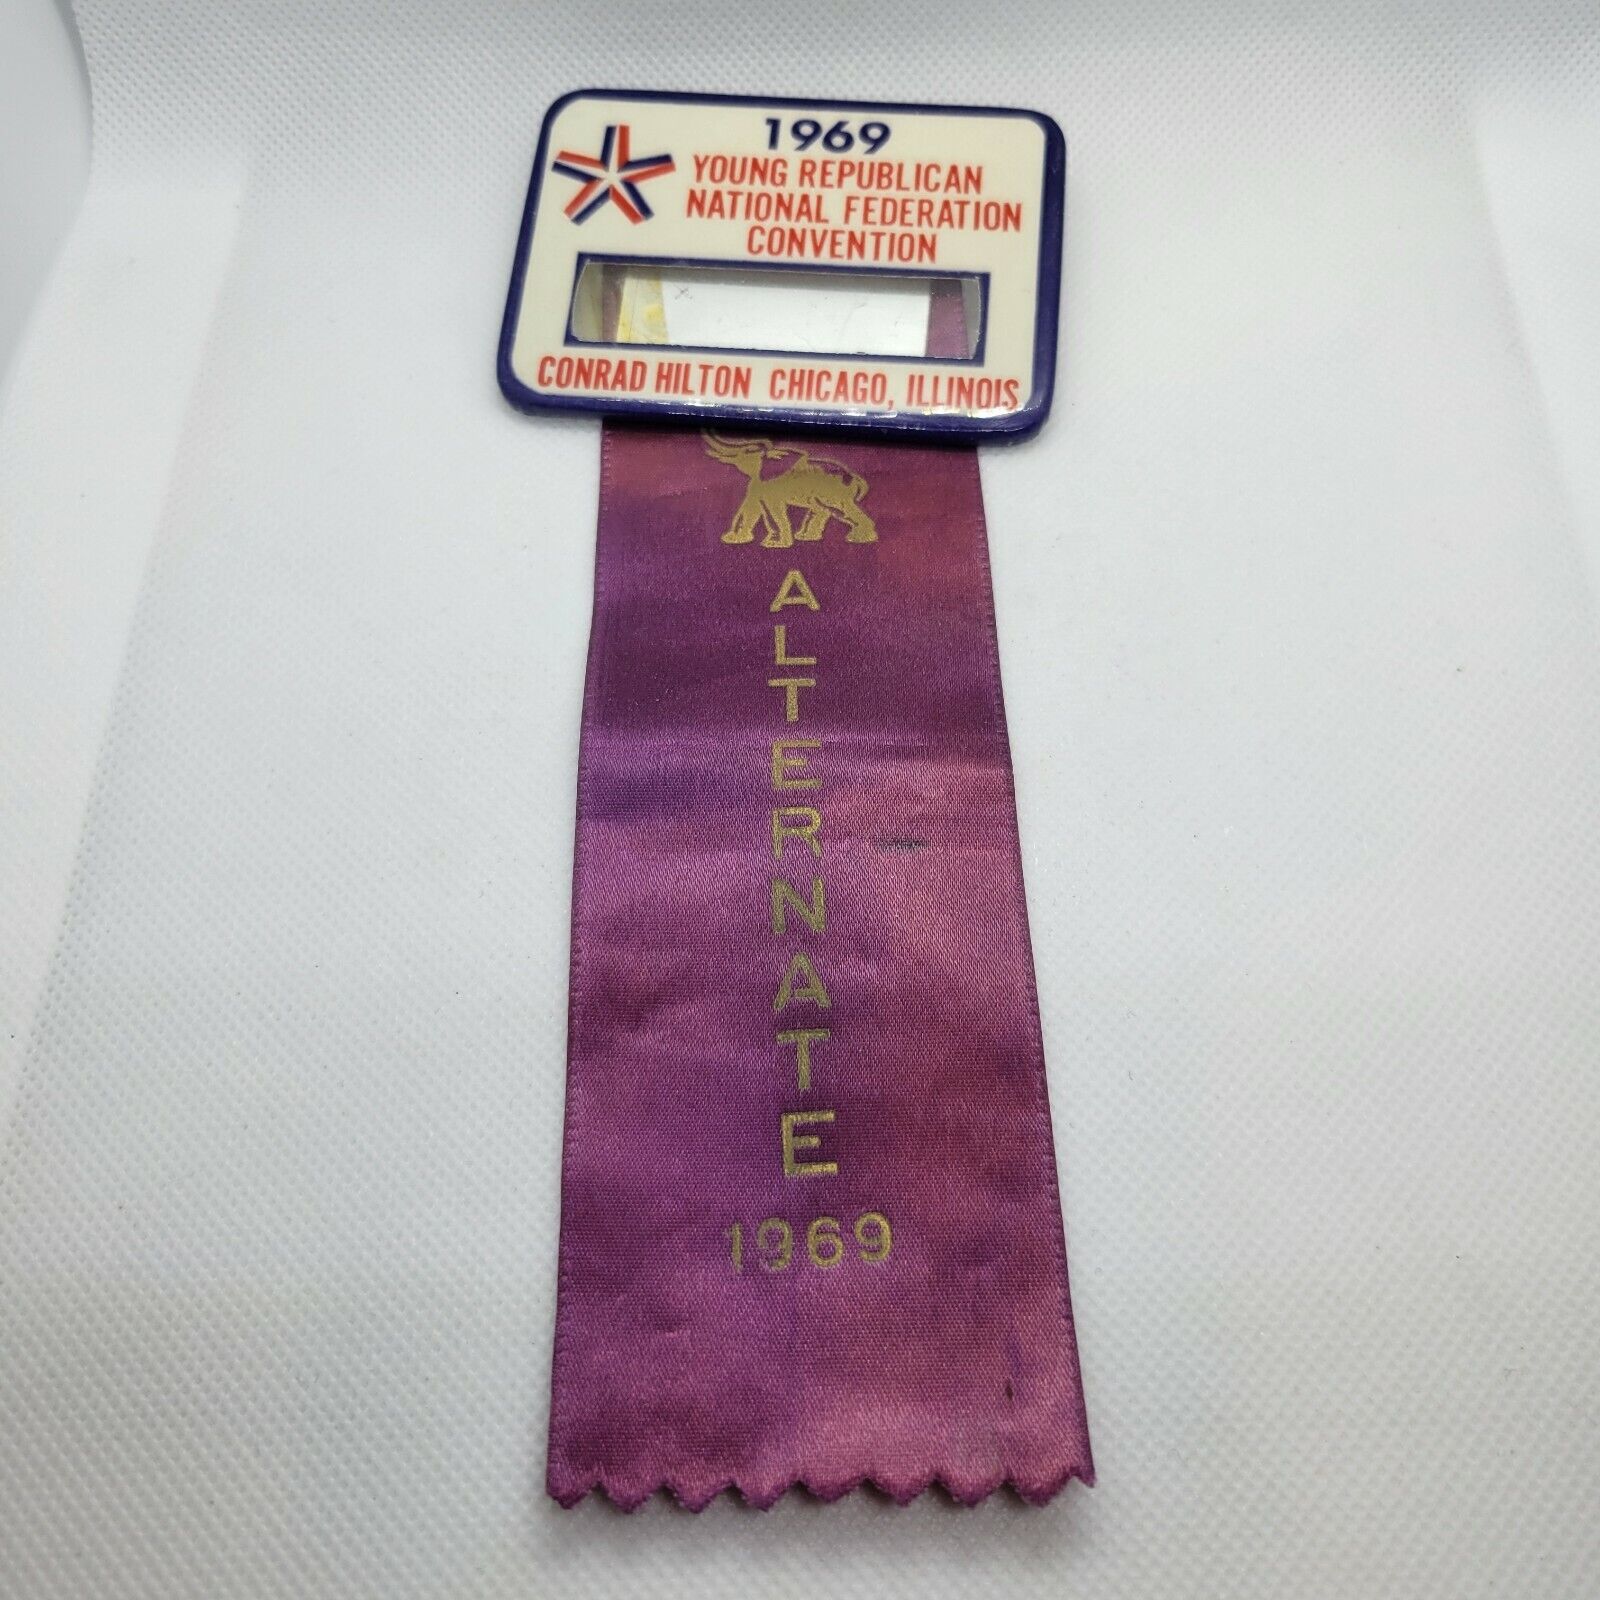 1969 Young Republican National Federation Convention Alternate Badge GOP